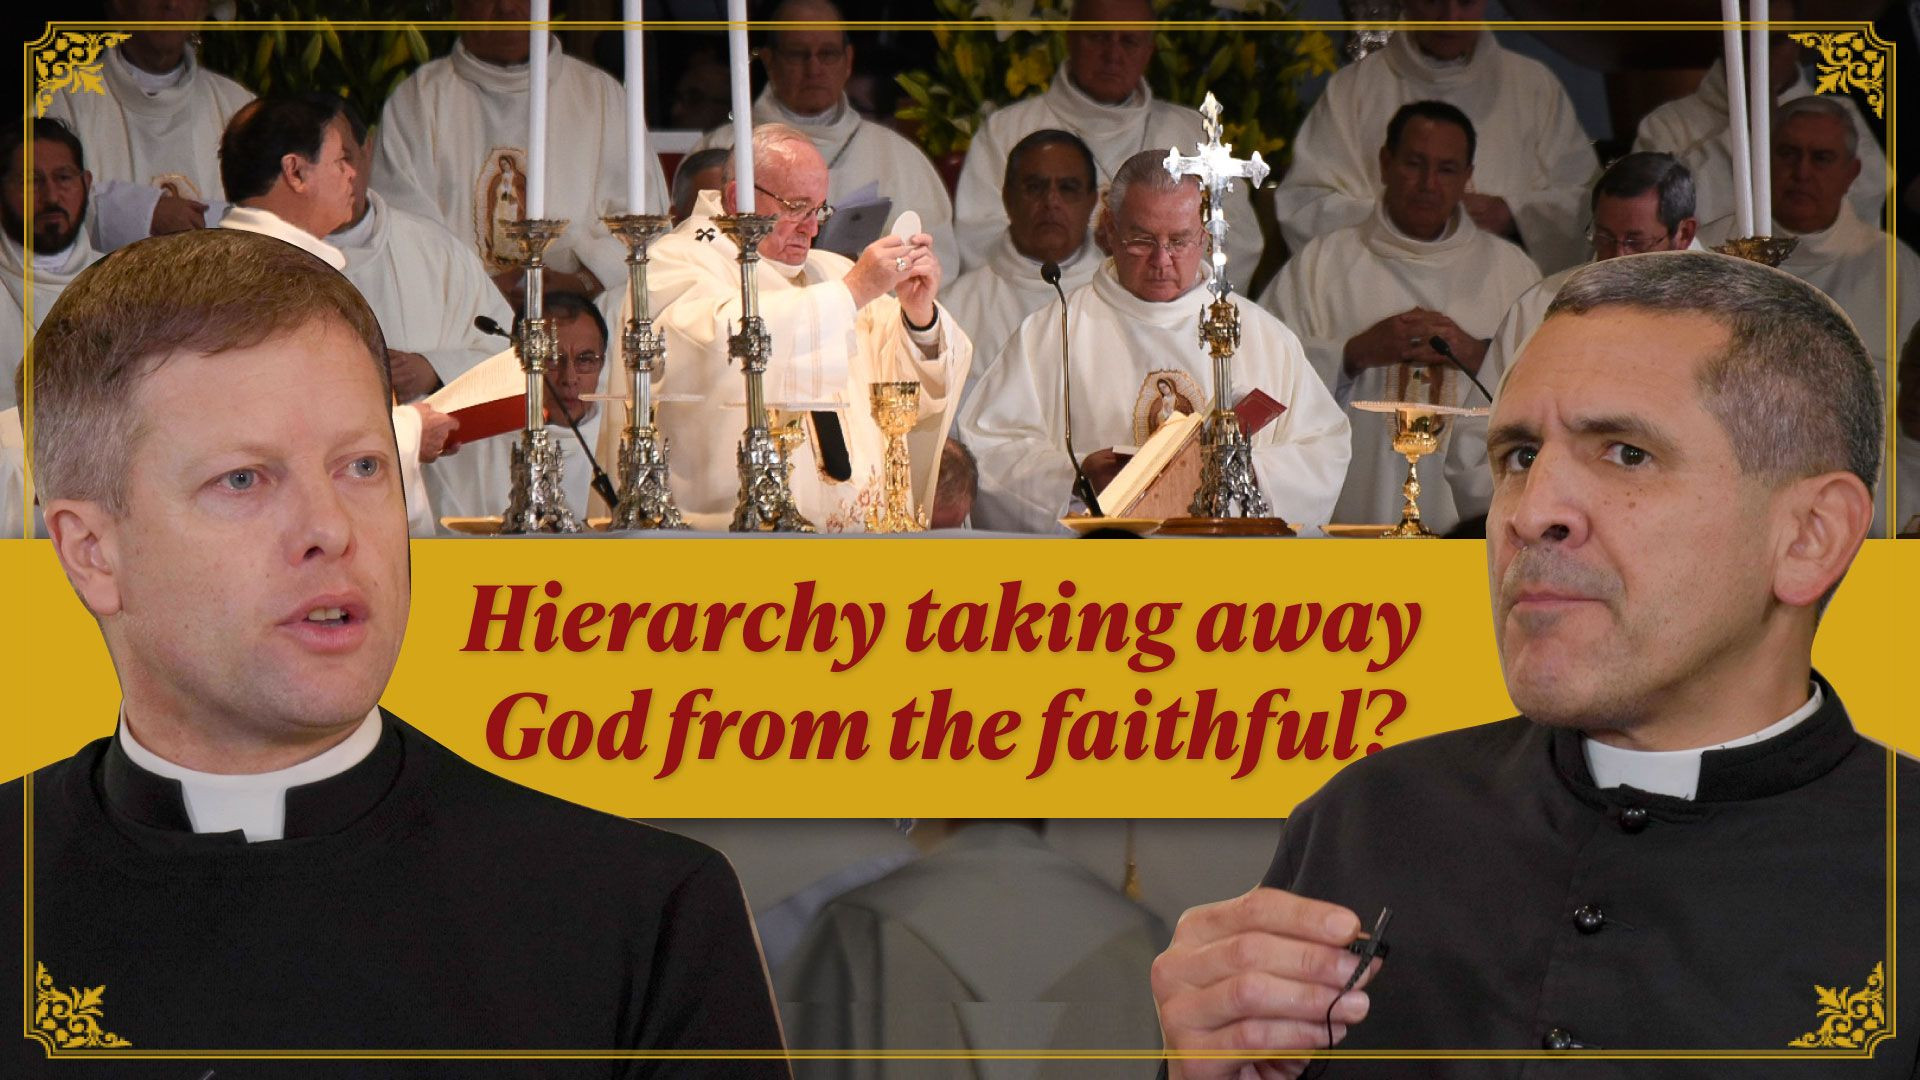 "God is being taken away from the faithful by the hierarchy"